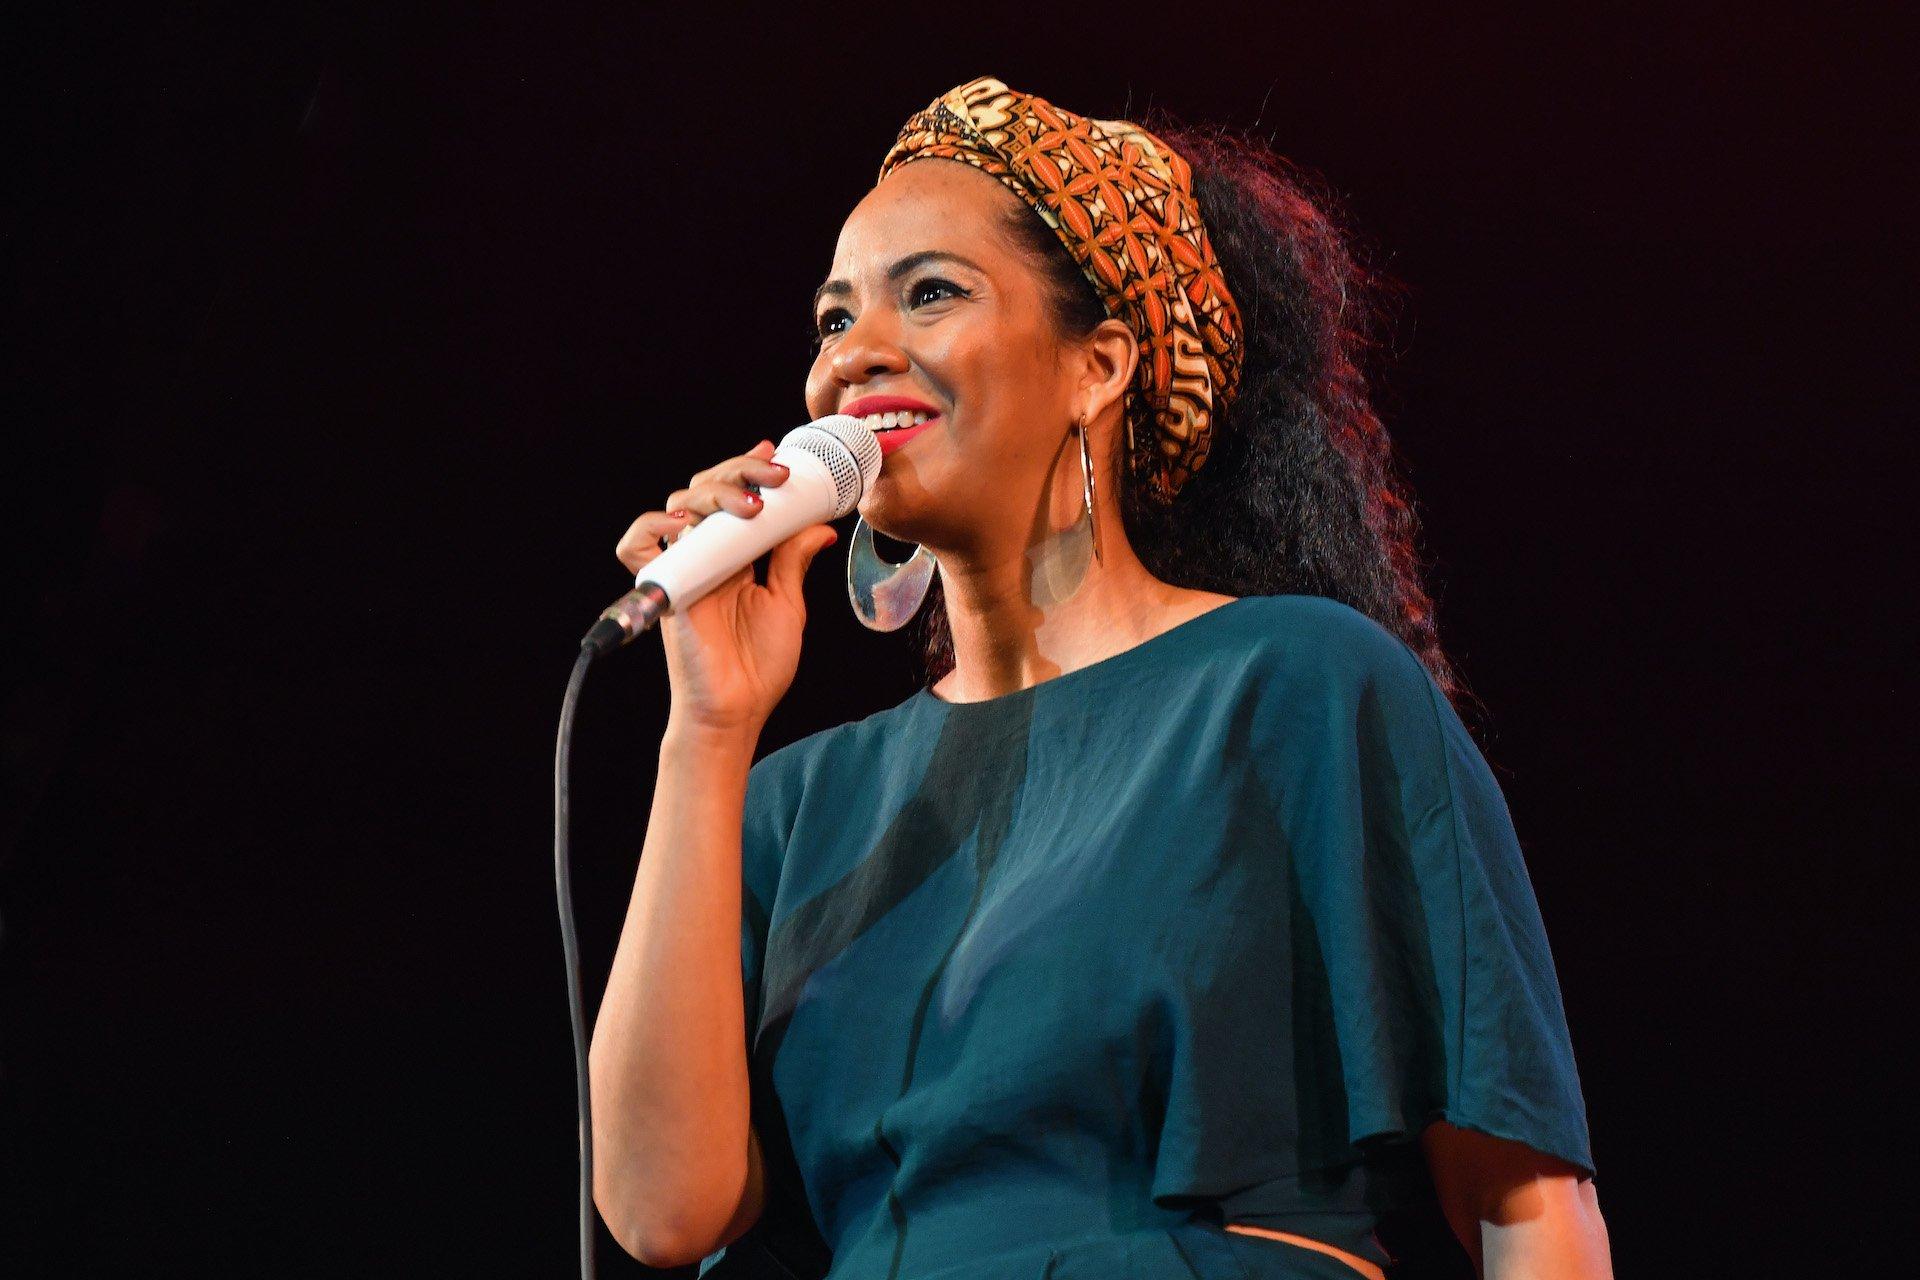 Photo of Eme Alfonso performing at the National Theatre of Cuba during the 33rd International Jazz Plaza Festival on January 21, 2018, in Havana, Cuba